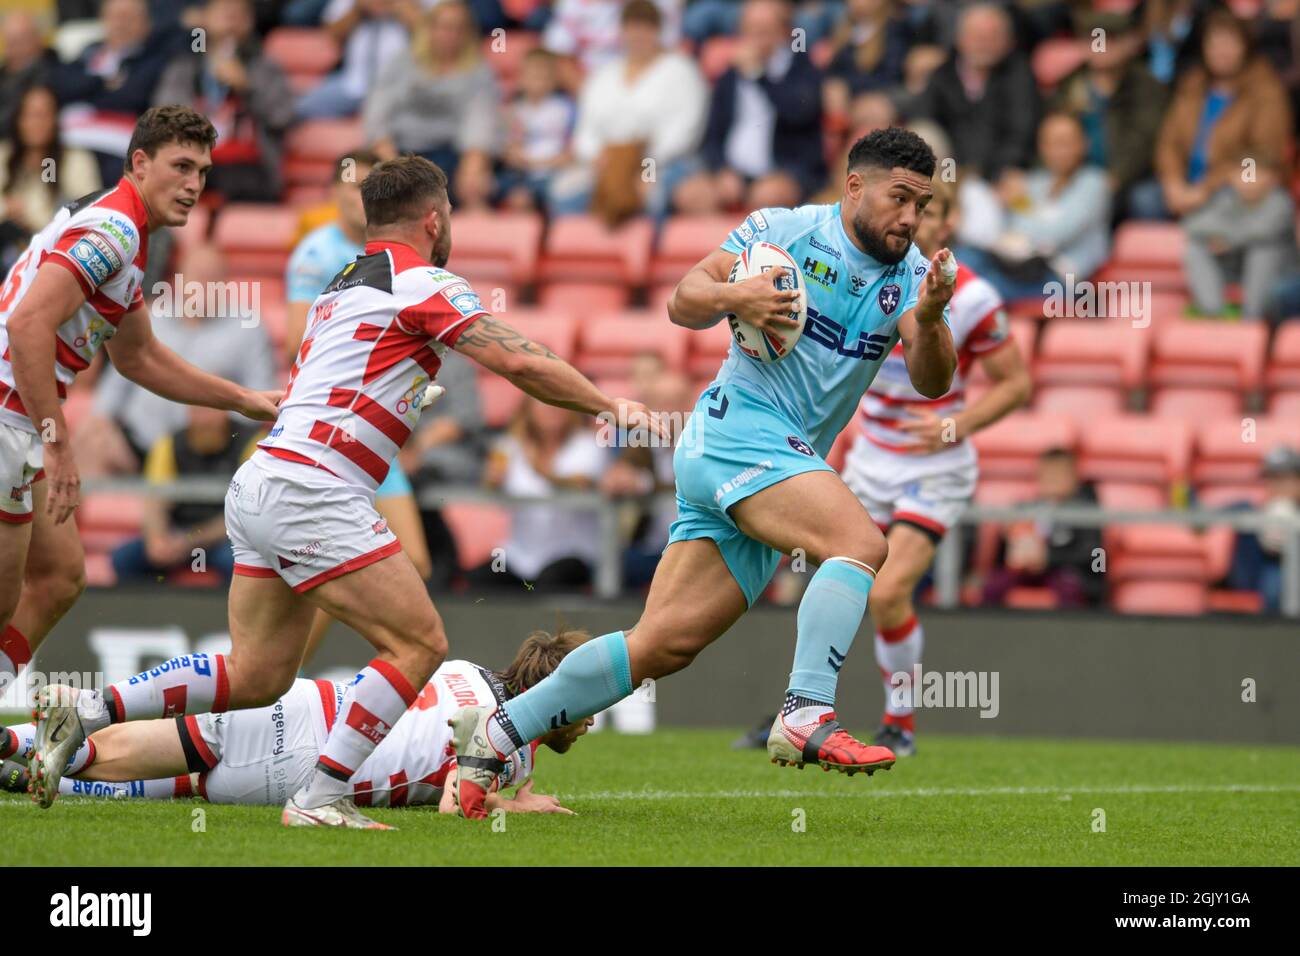 Kelepi Tanginoa (12) of Wakefield Trinity breaks forward to score a try in Leigh, United Kingdom on 9/12/2021. (Photo by Simon Whitehead/News Images/Sipa USA) Stock Photo